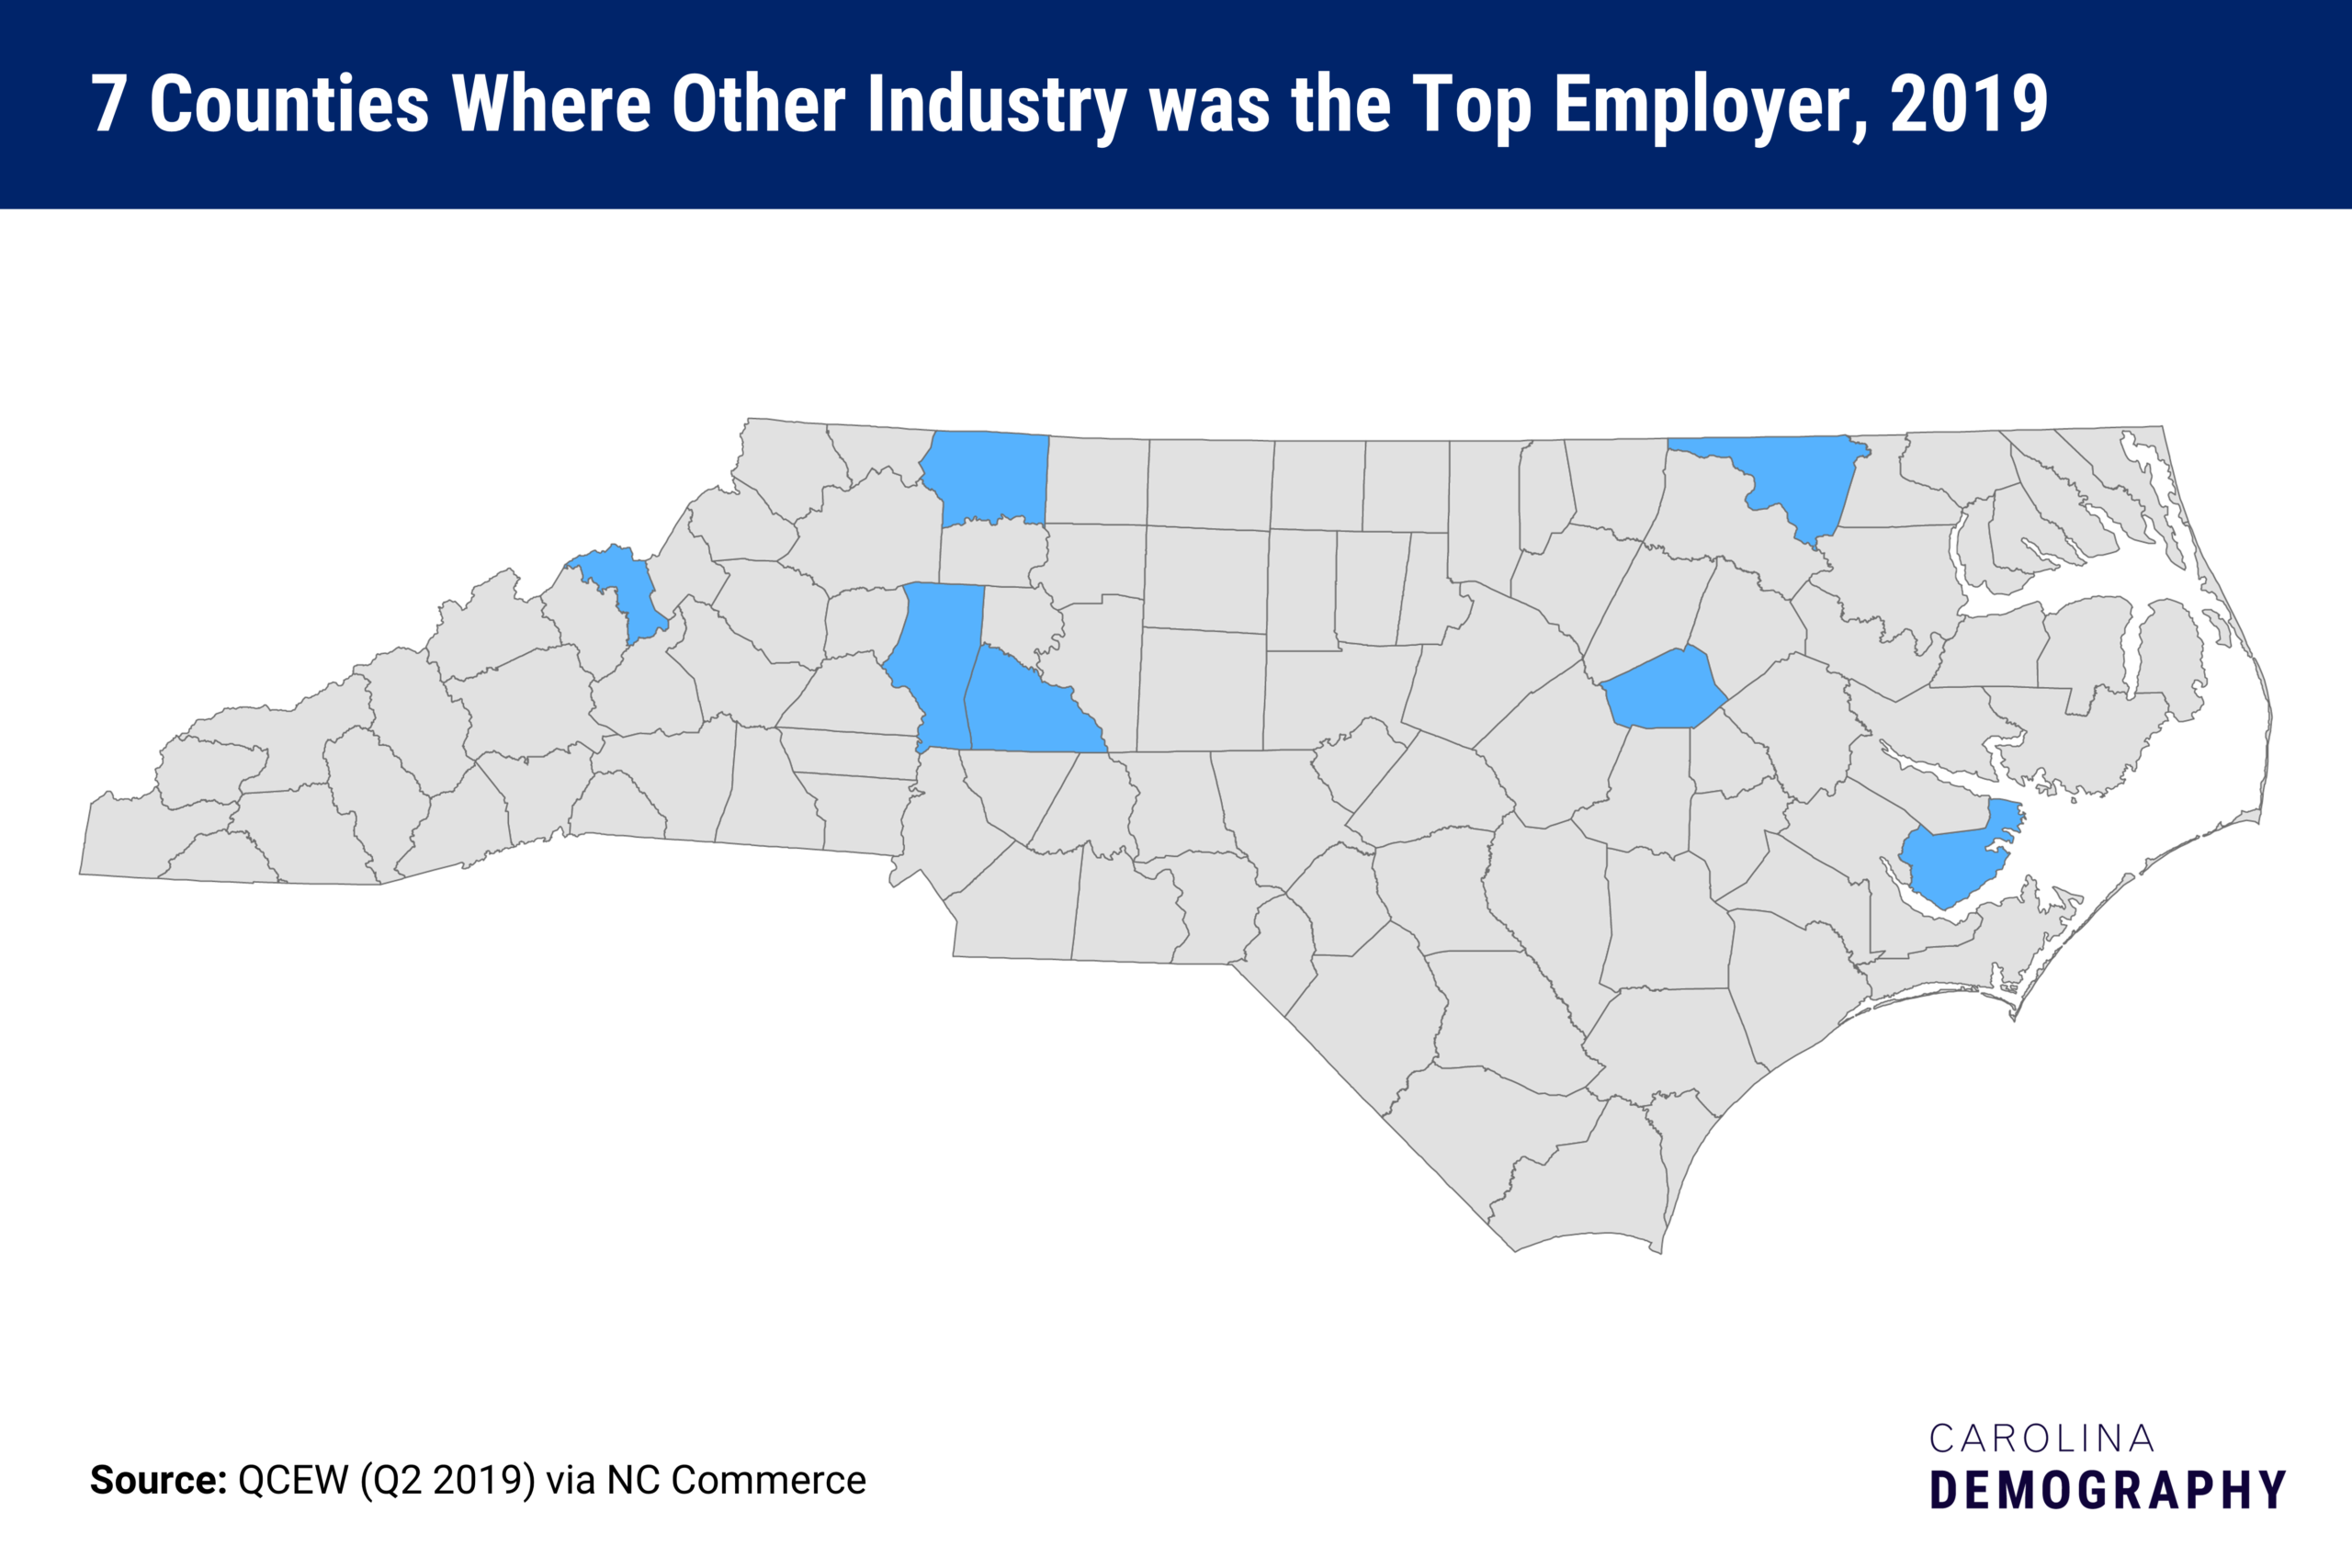 7 counties where Other industry was the top employer